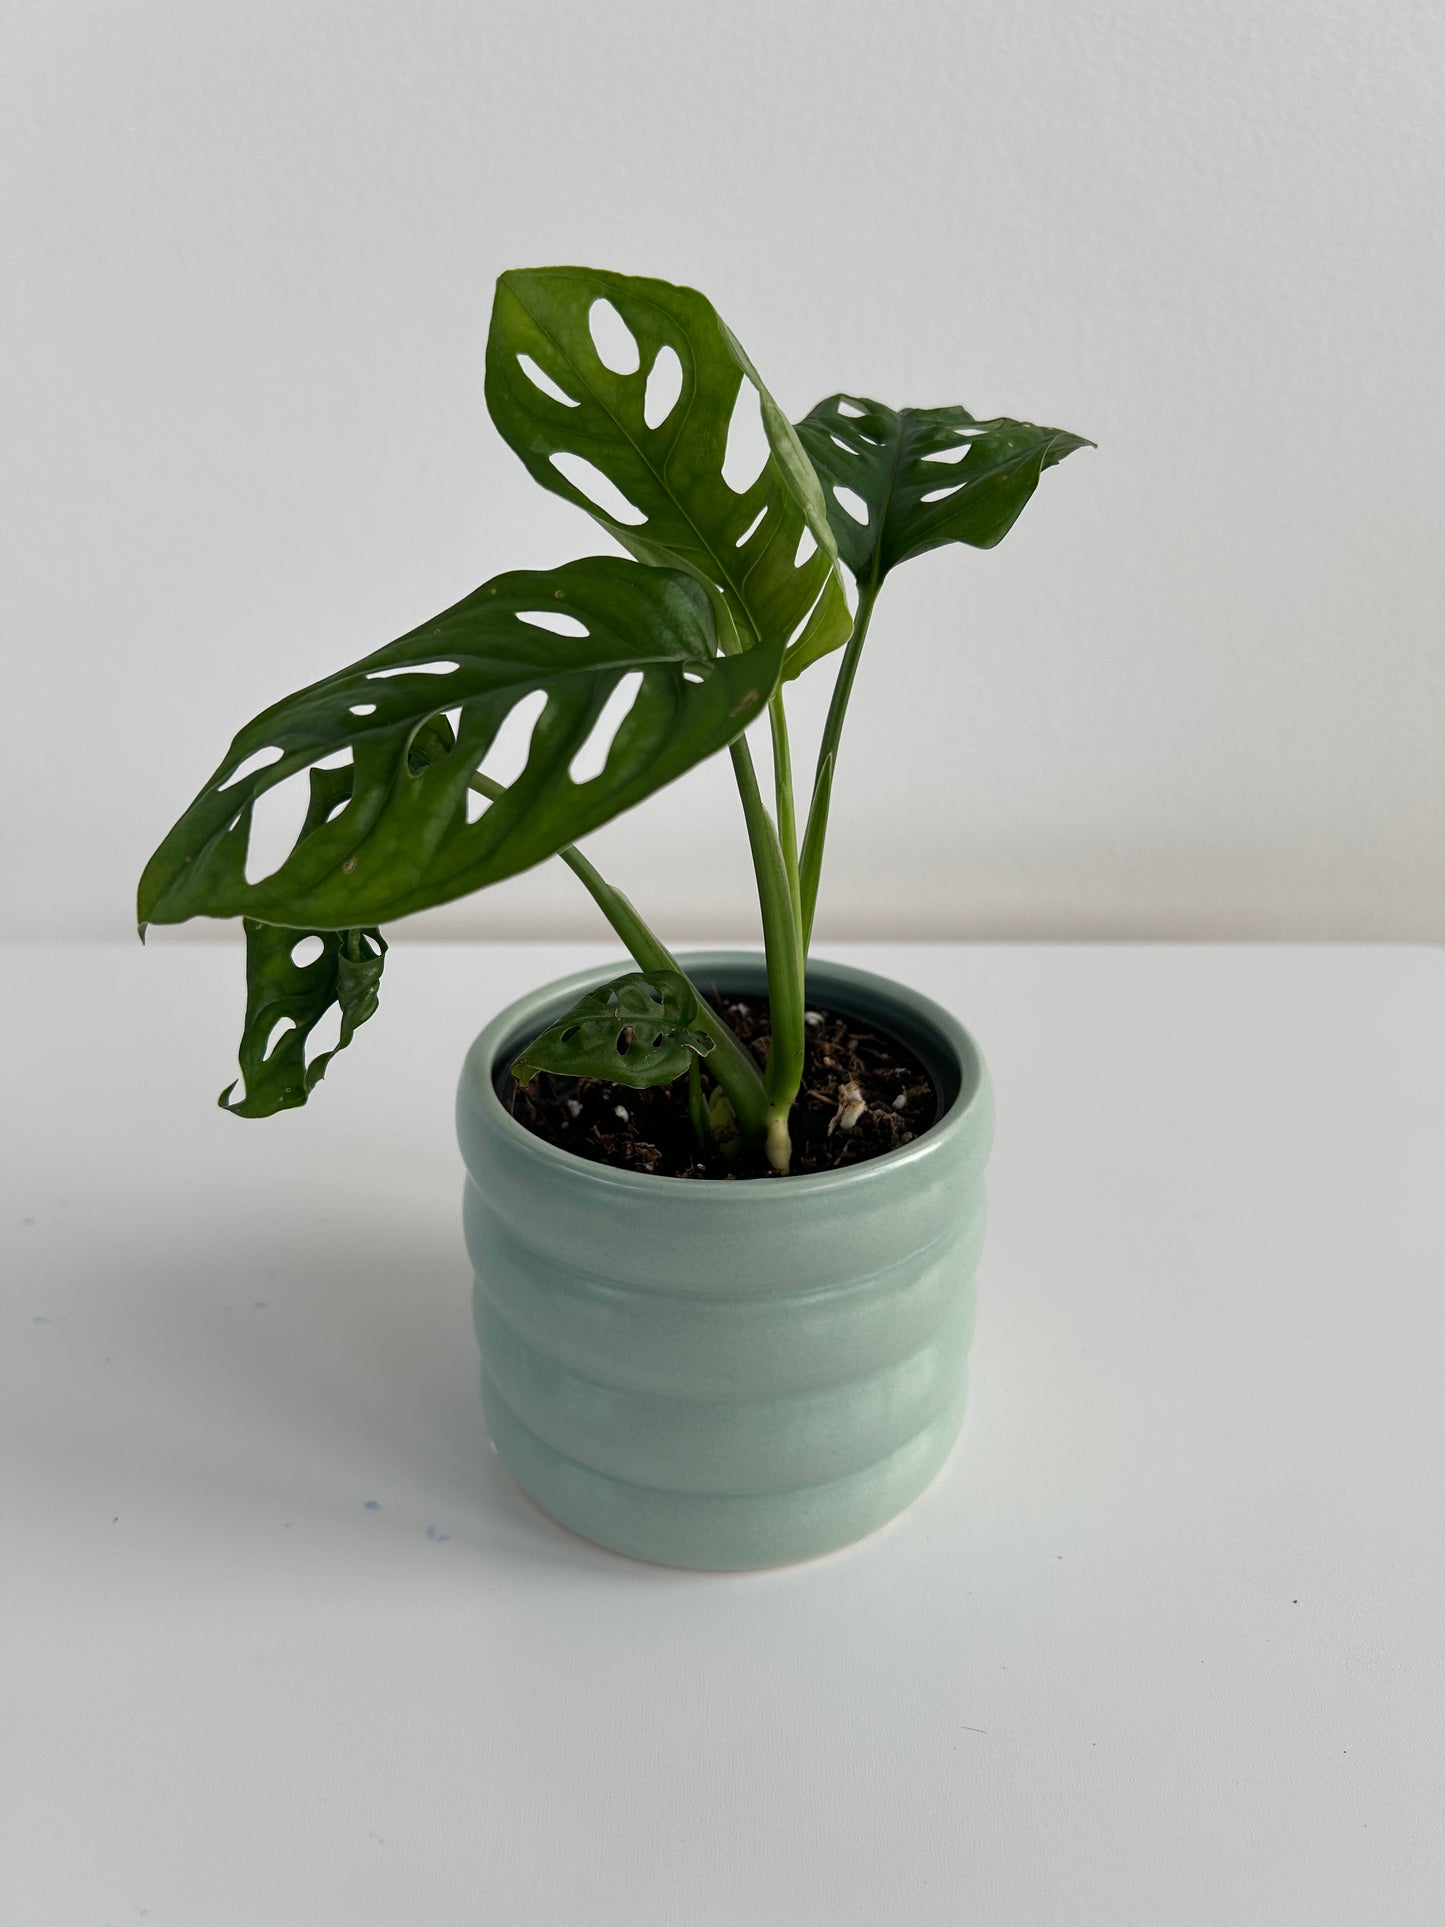 Blush pink coil pot 10cm with monstera monkey mask indoor plant